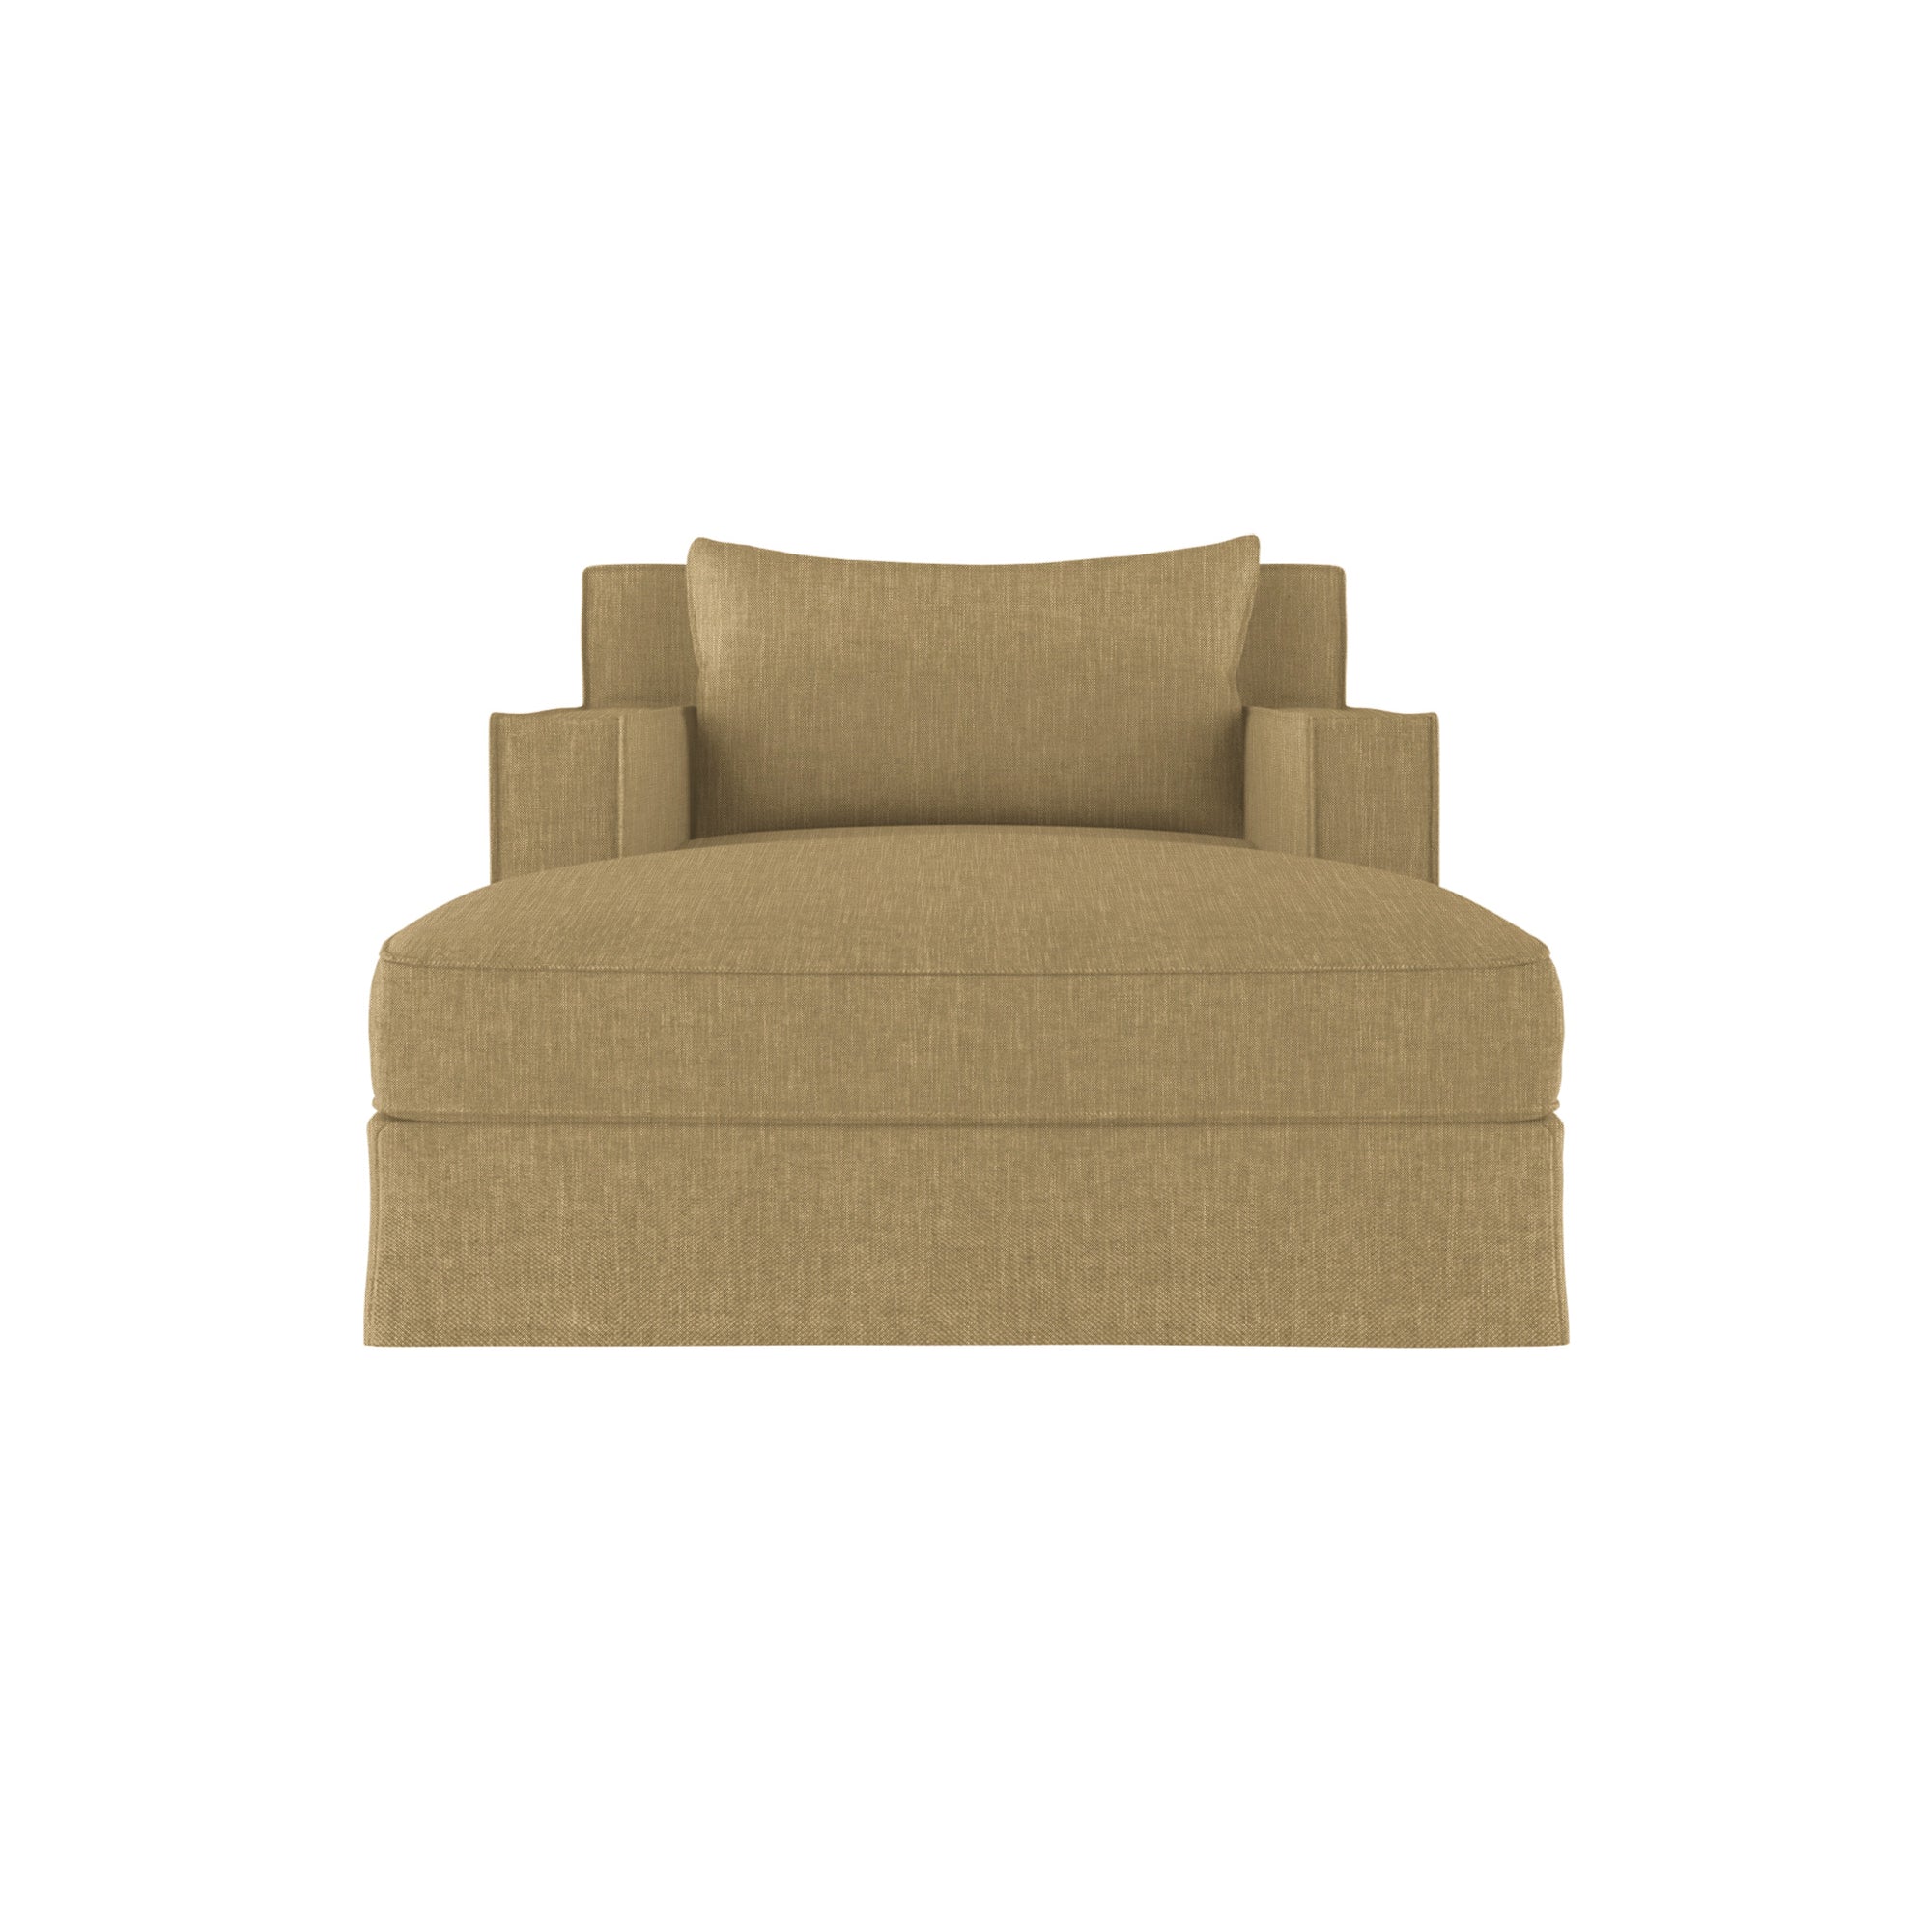 Mulberry Chaise - Marzipan Box Weave Linen